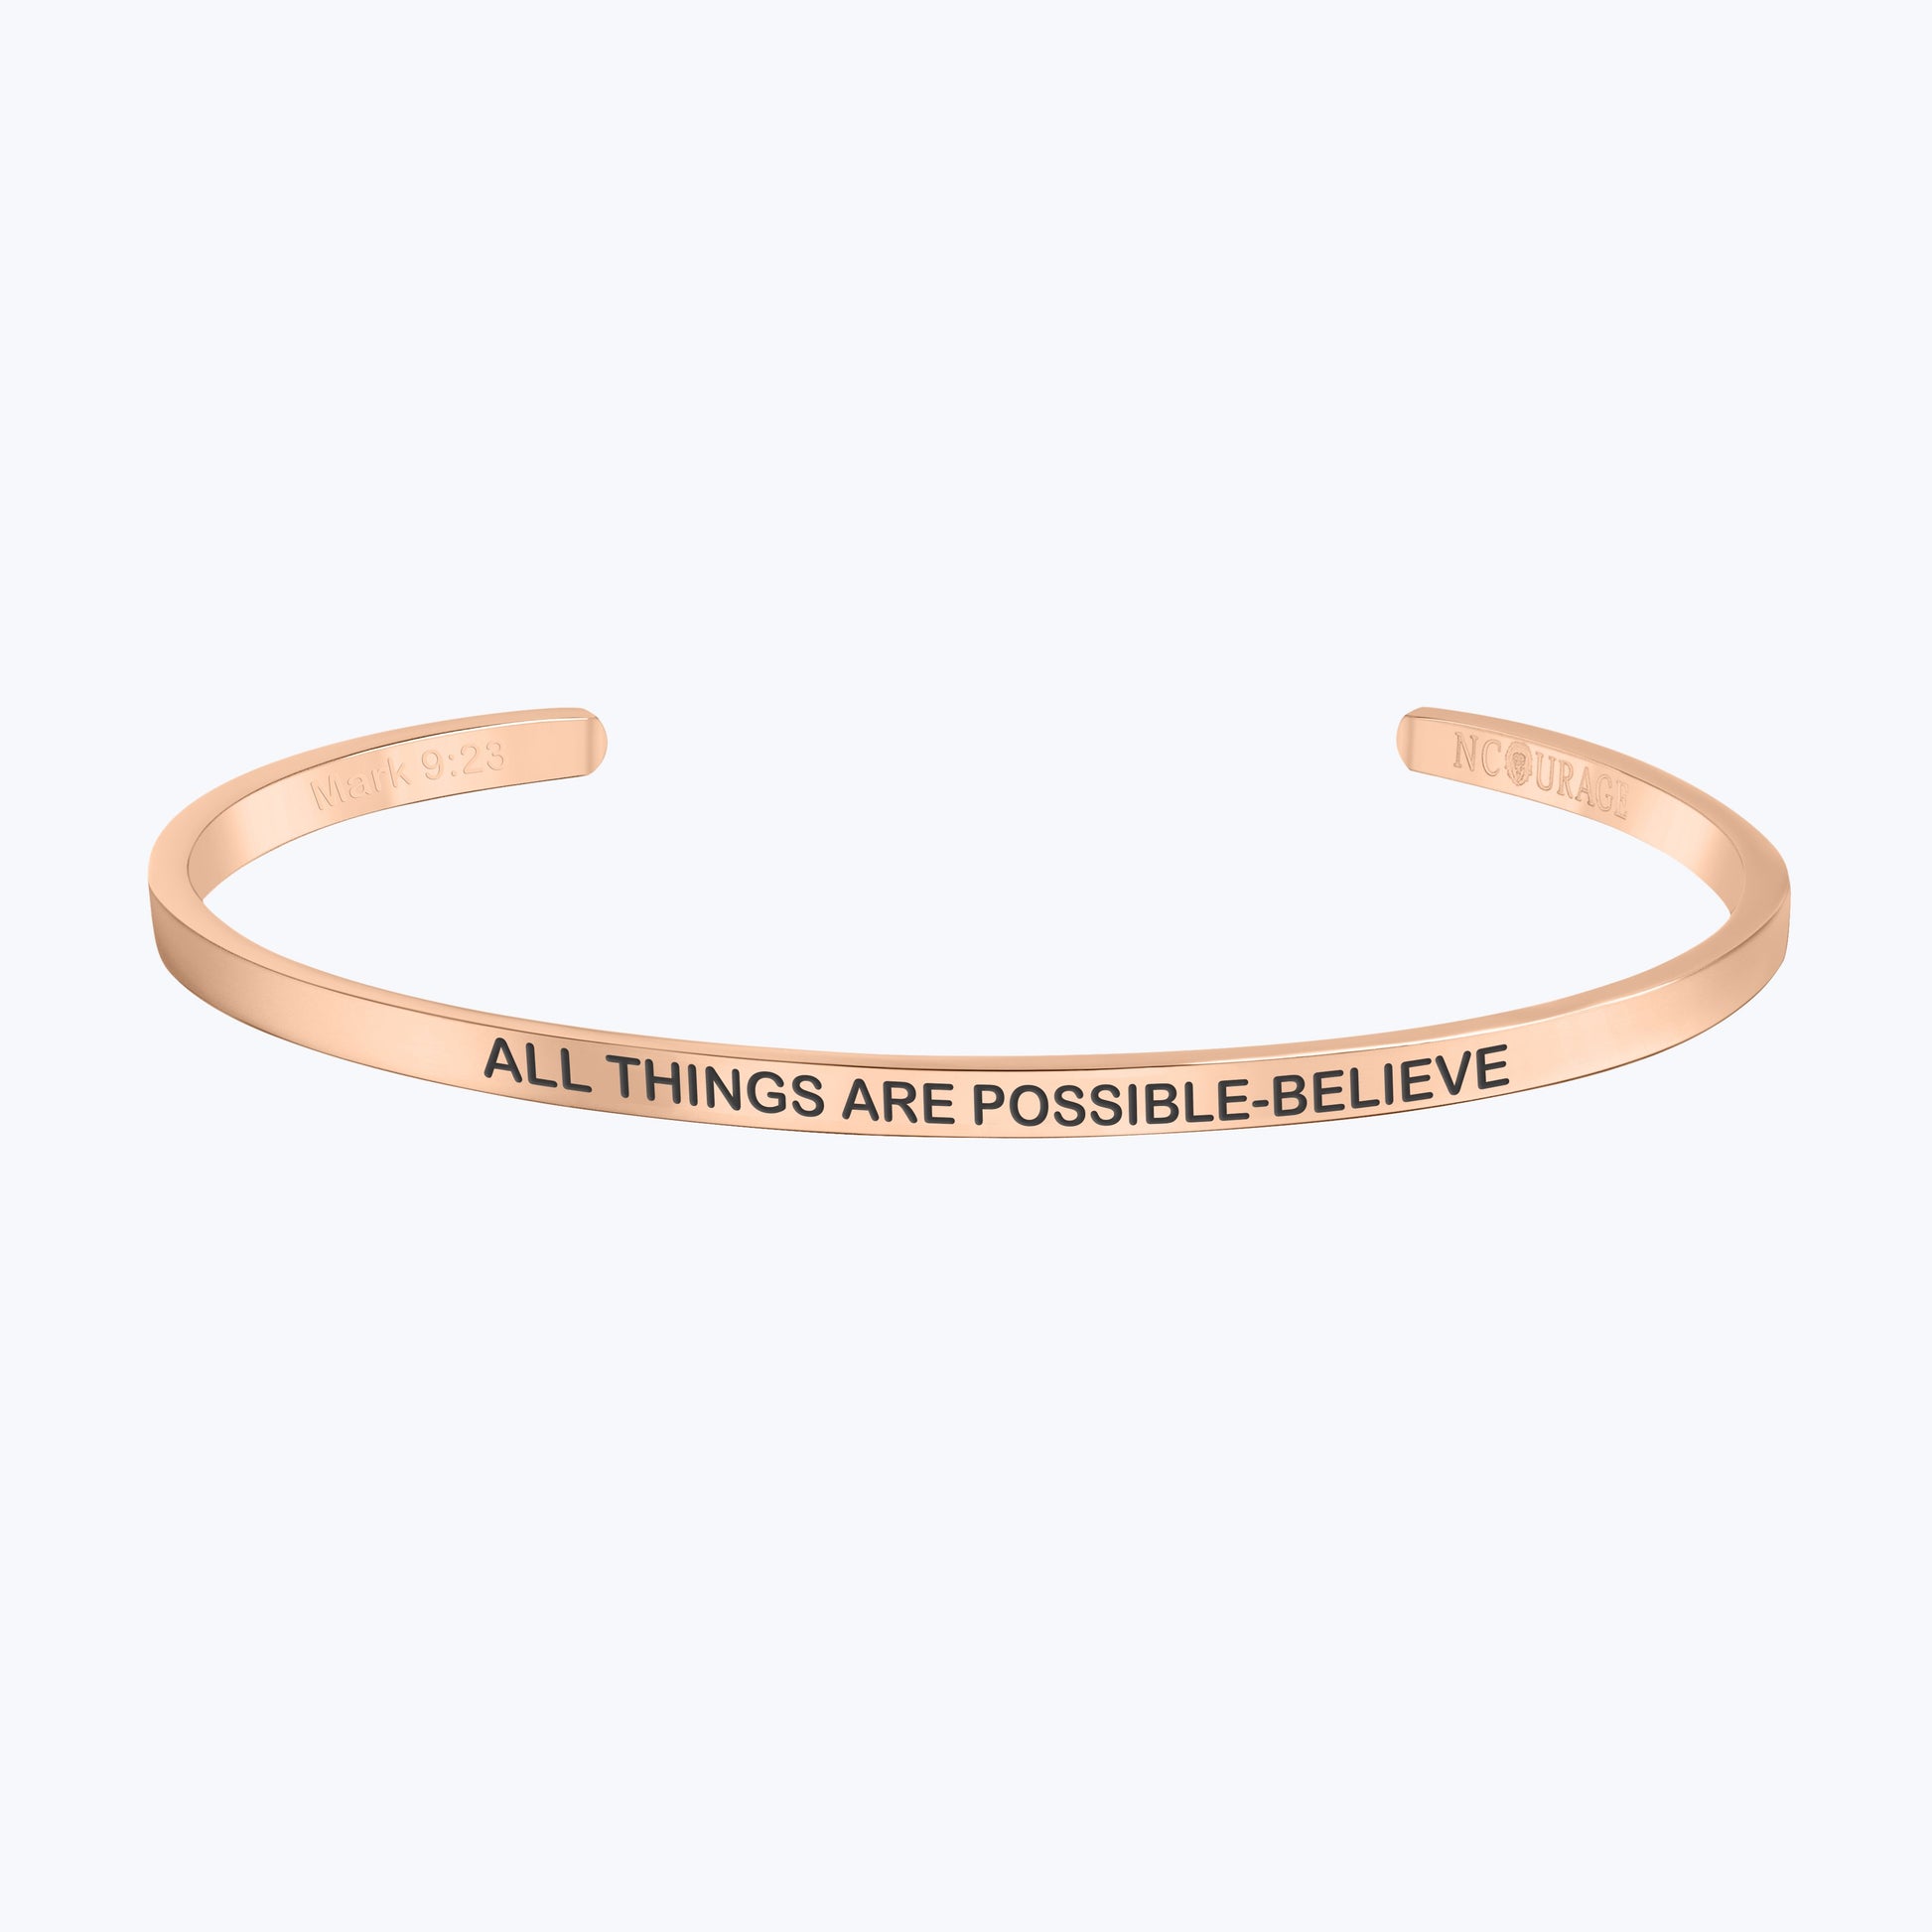 ALL THINGS ARE POSSIBLE - BELIEVE - NCOURAGE Bands and Bracelets